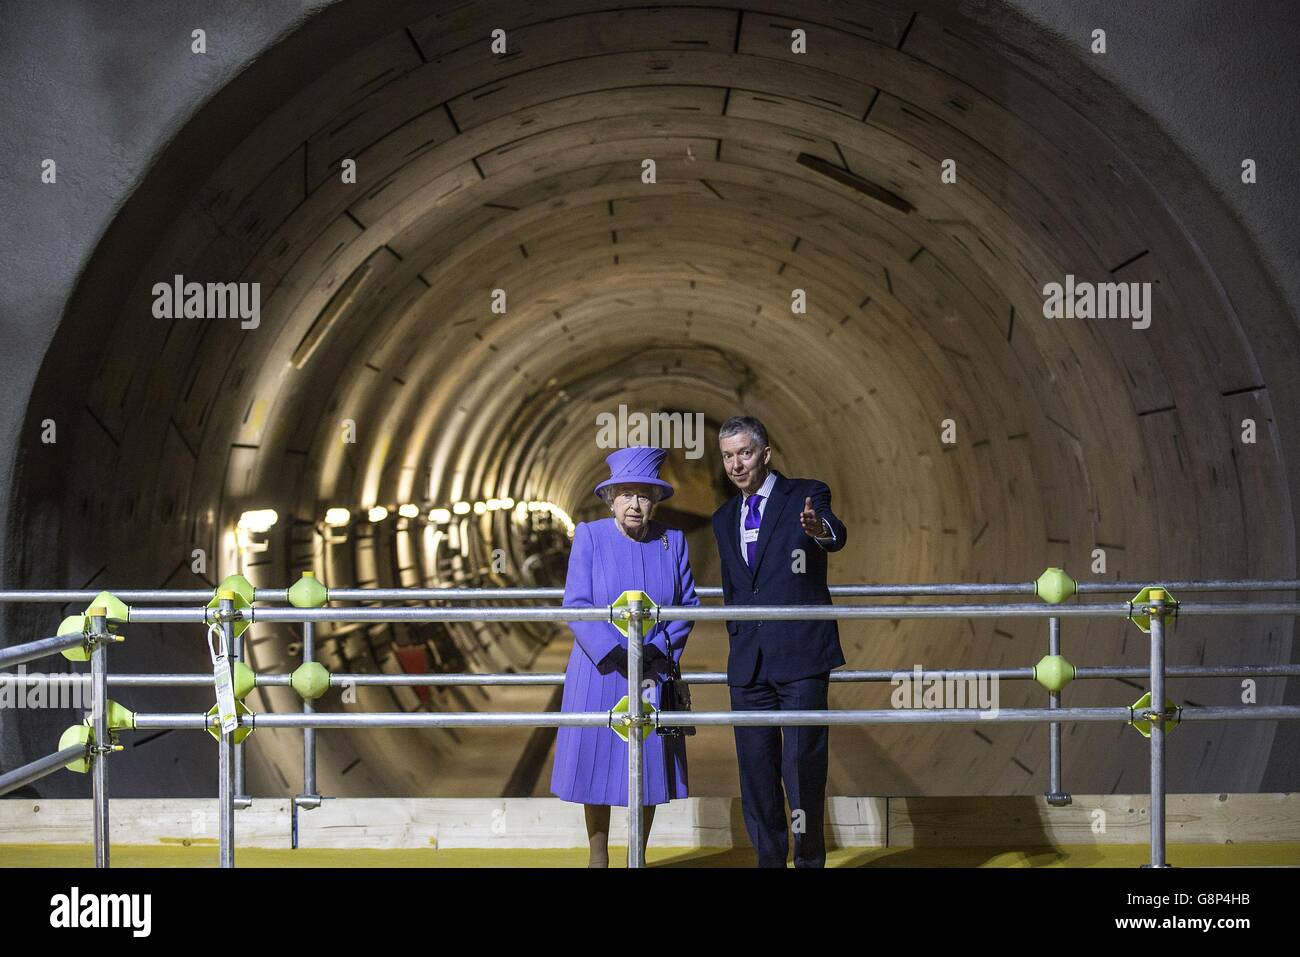 Queen Elizabeth II speaks with Mike Brown, London Transport Commissioner, at the tunnel entrance to one of the new platforms of the new Crossrail Bond Street station, which is still under construction. Stock Photo